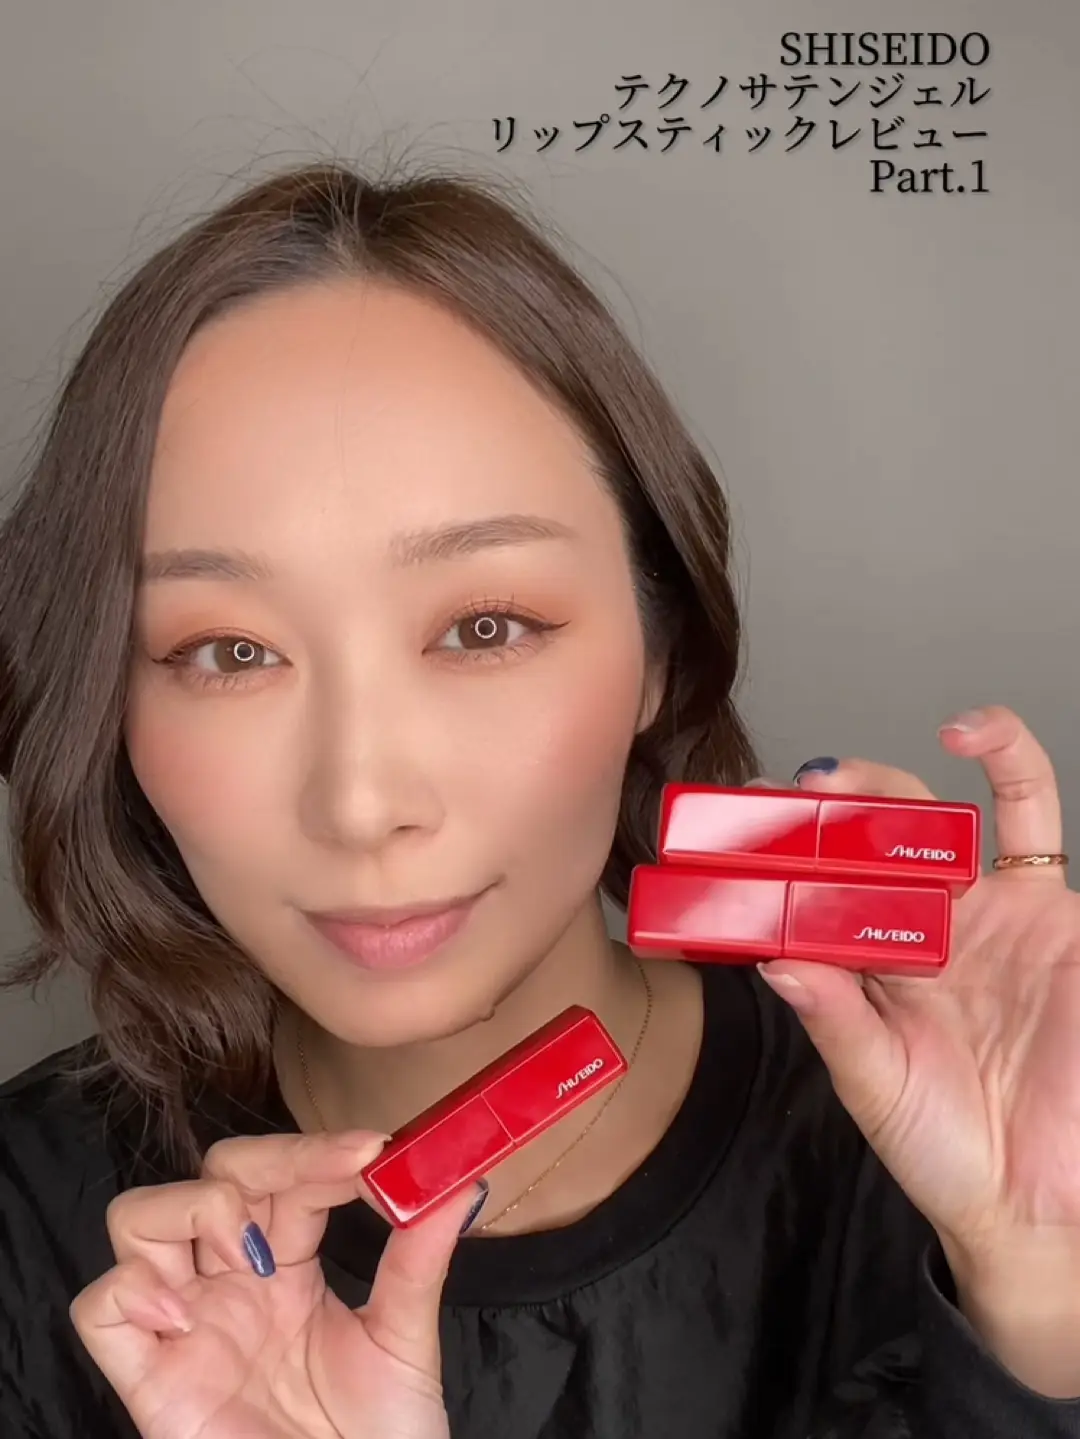 SHISEIDO new review 🫦 elegant lips of adults ♡ | Video published by ぽか |  Lemon8